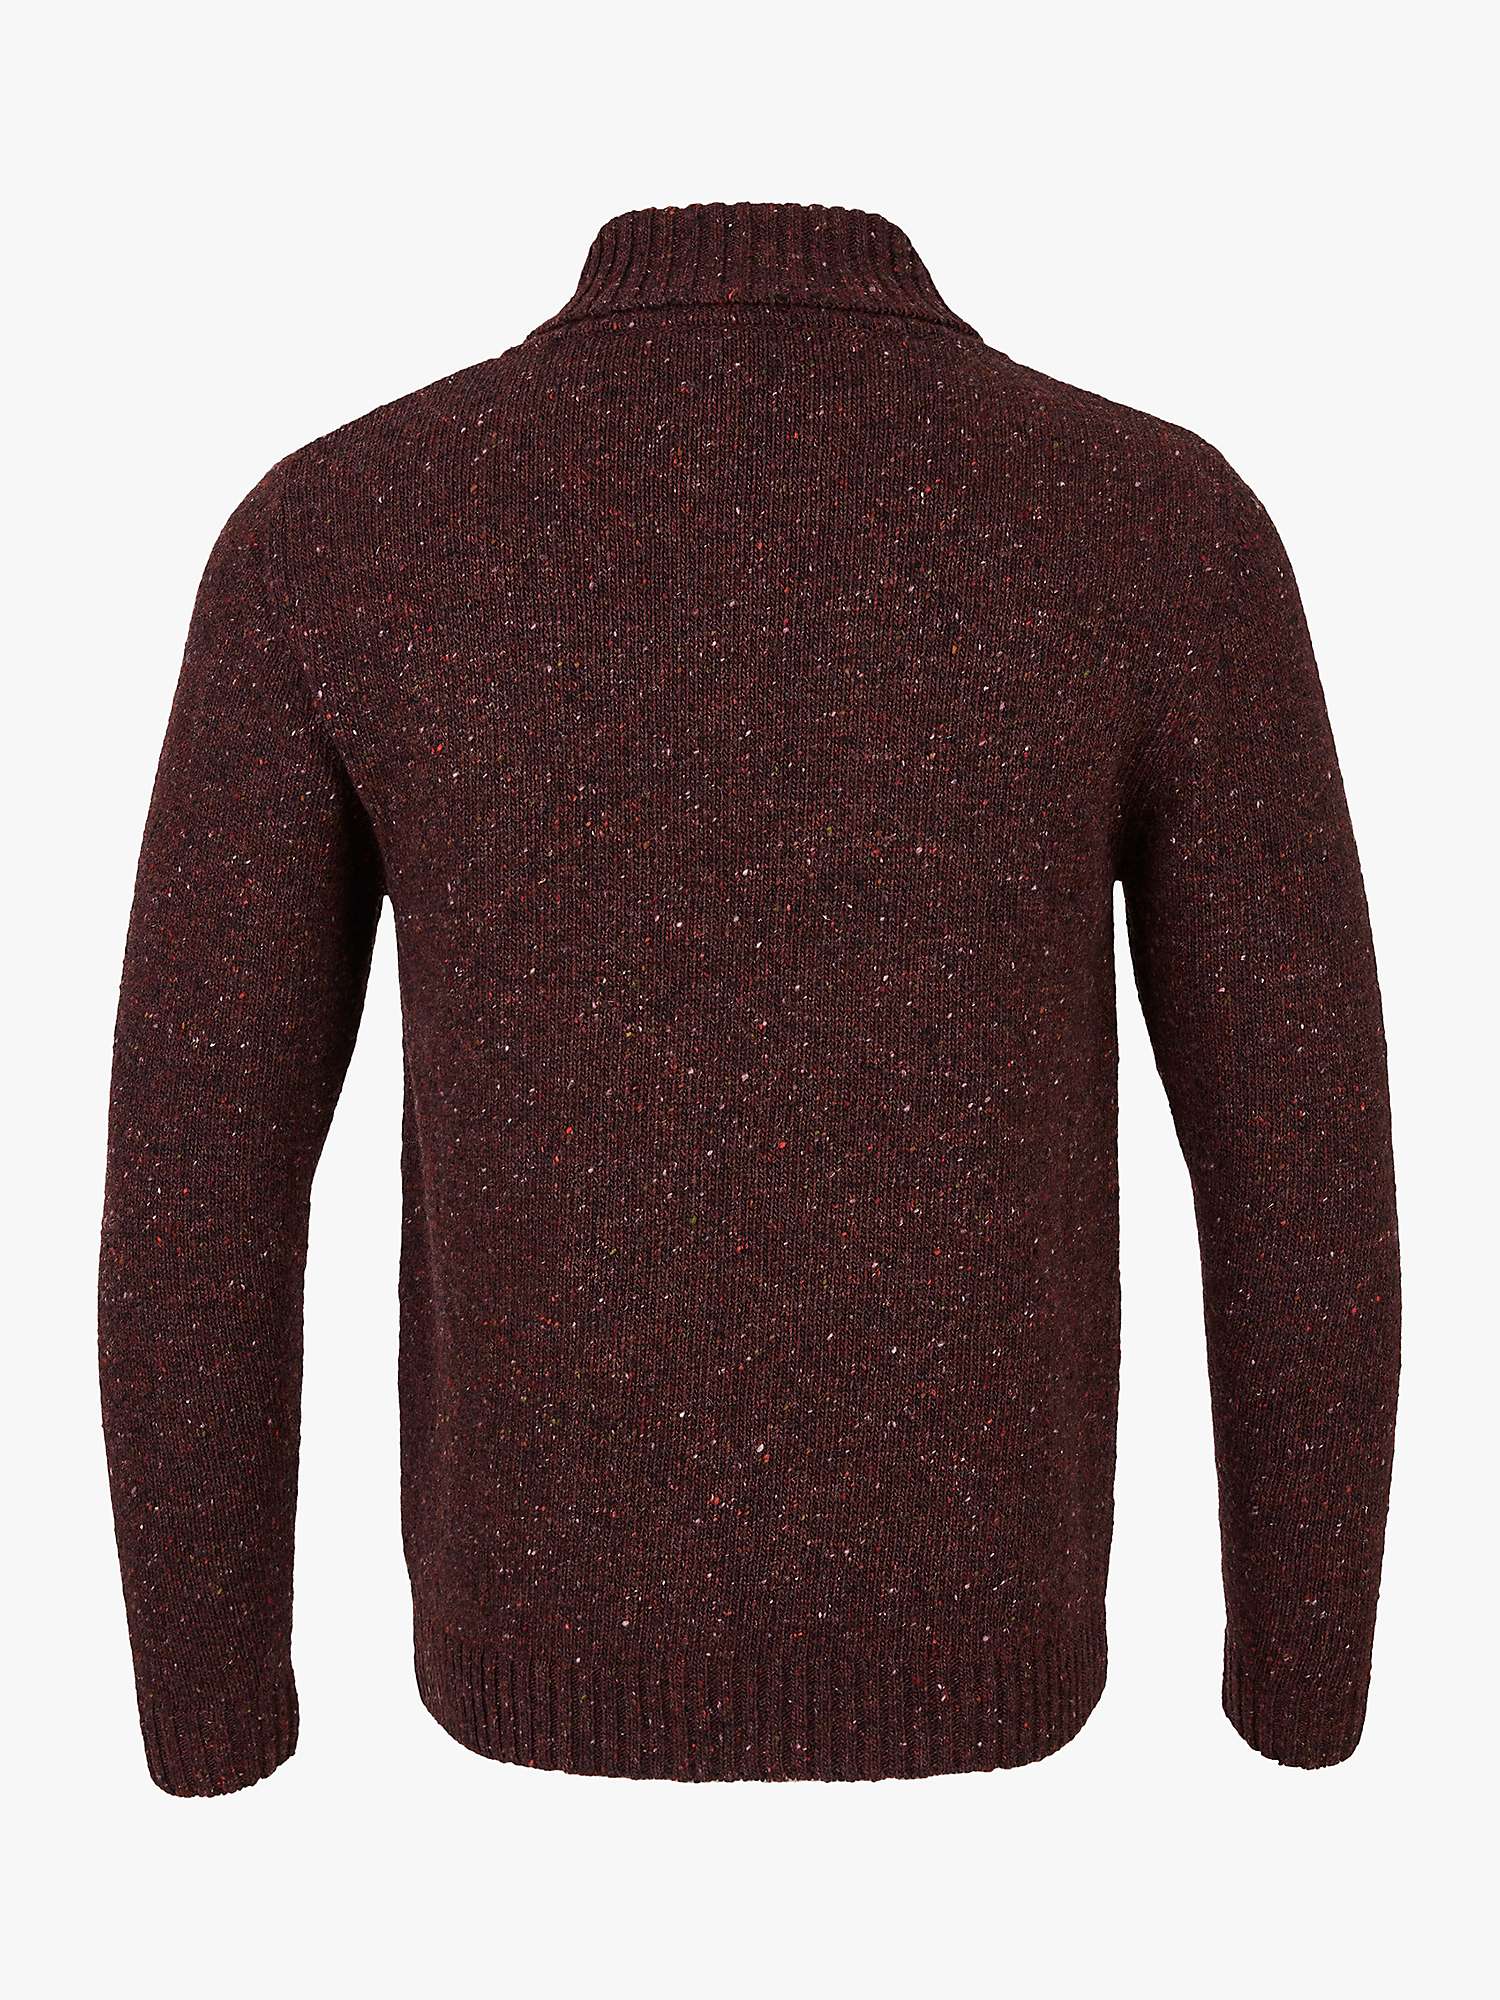 Buy Celtic & Co. Donegal Shawl Collar Wool Jumper Online at johnlewis.com